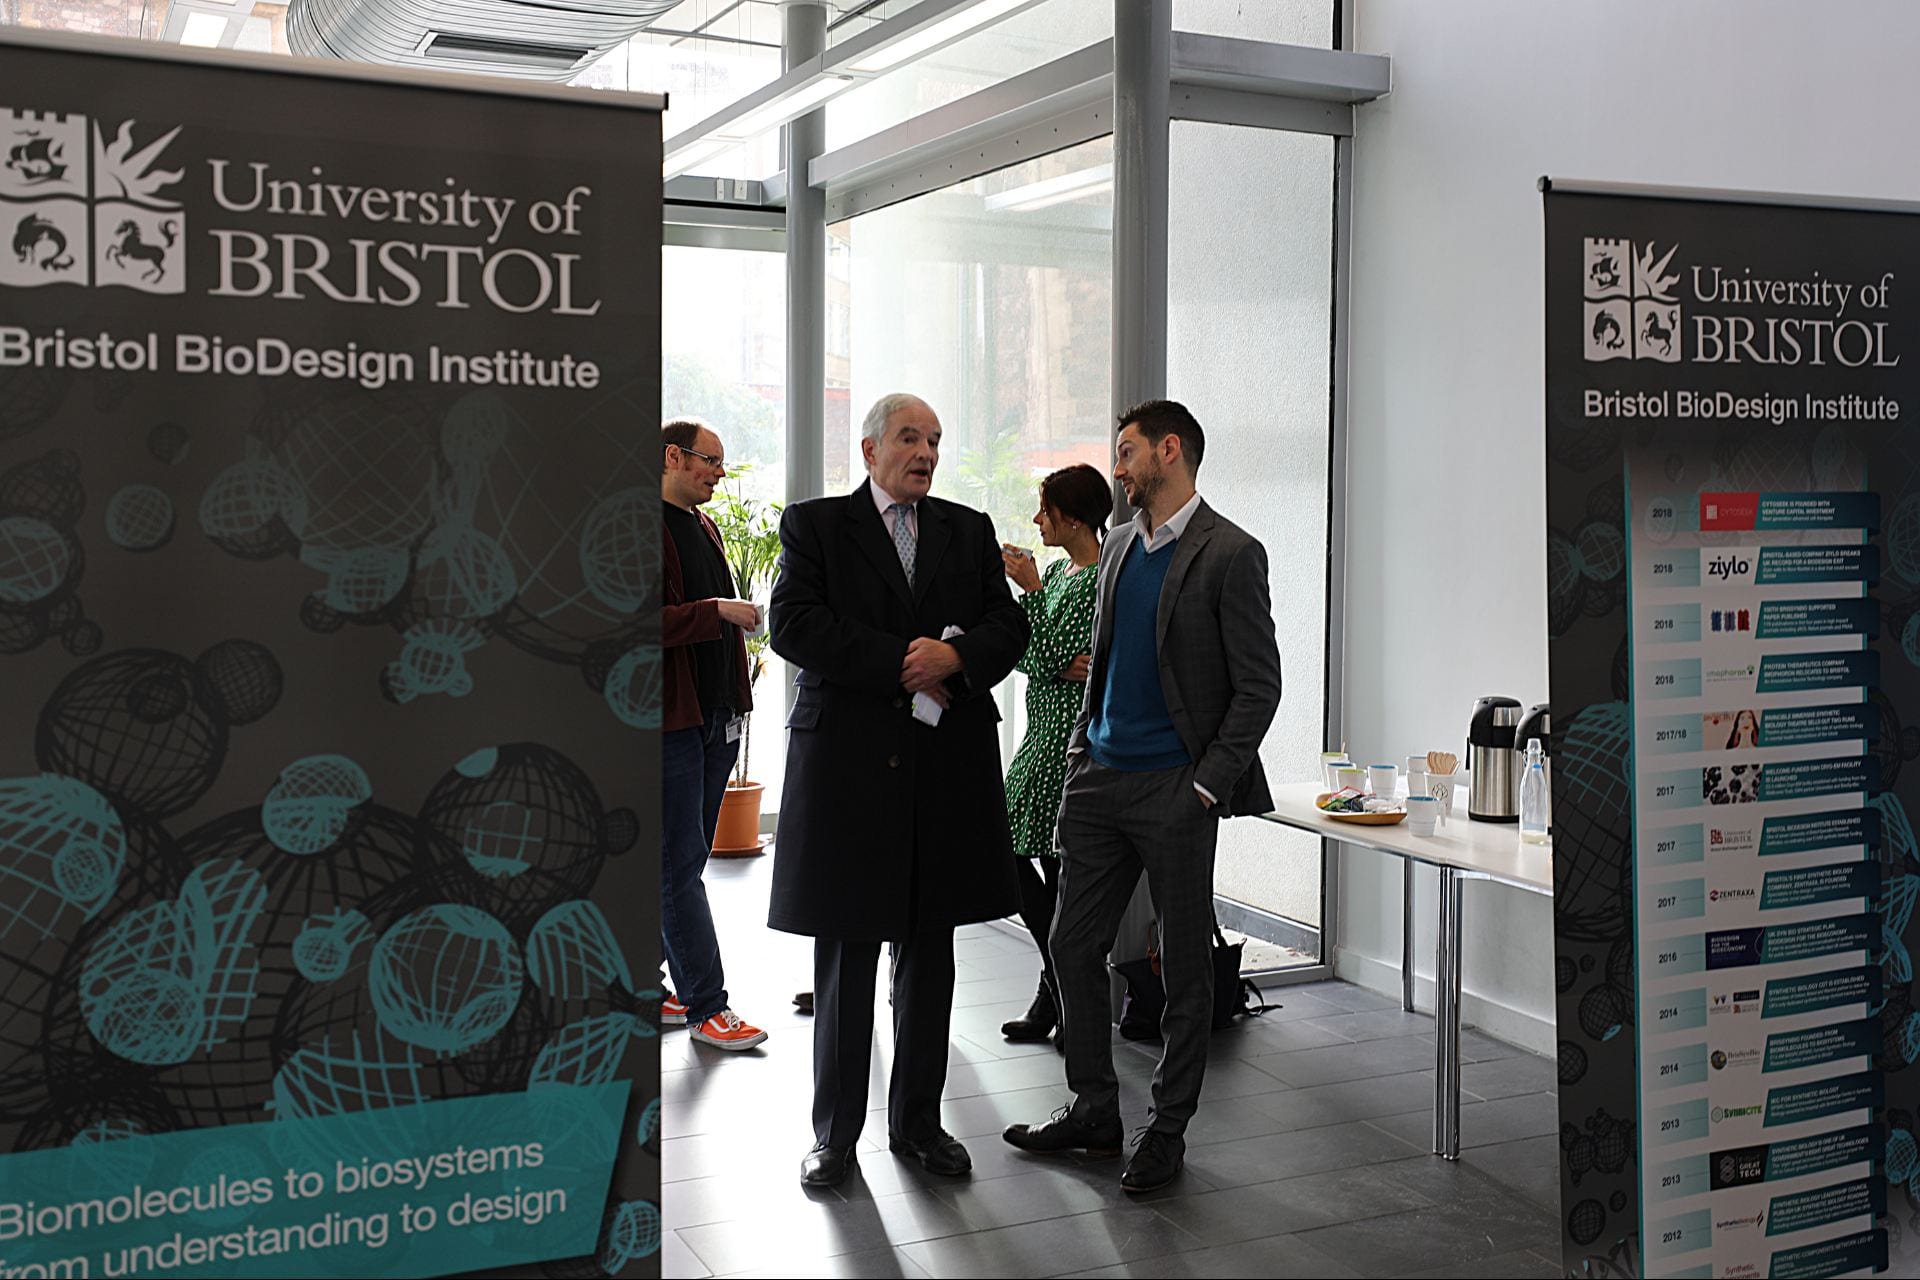 Lord Henley joins the team for coffee in the Life Sciences Building, University of Bristol